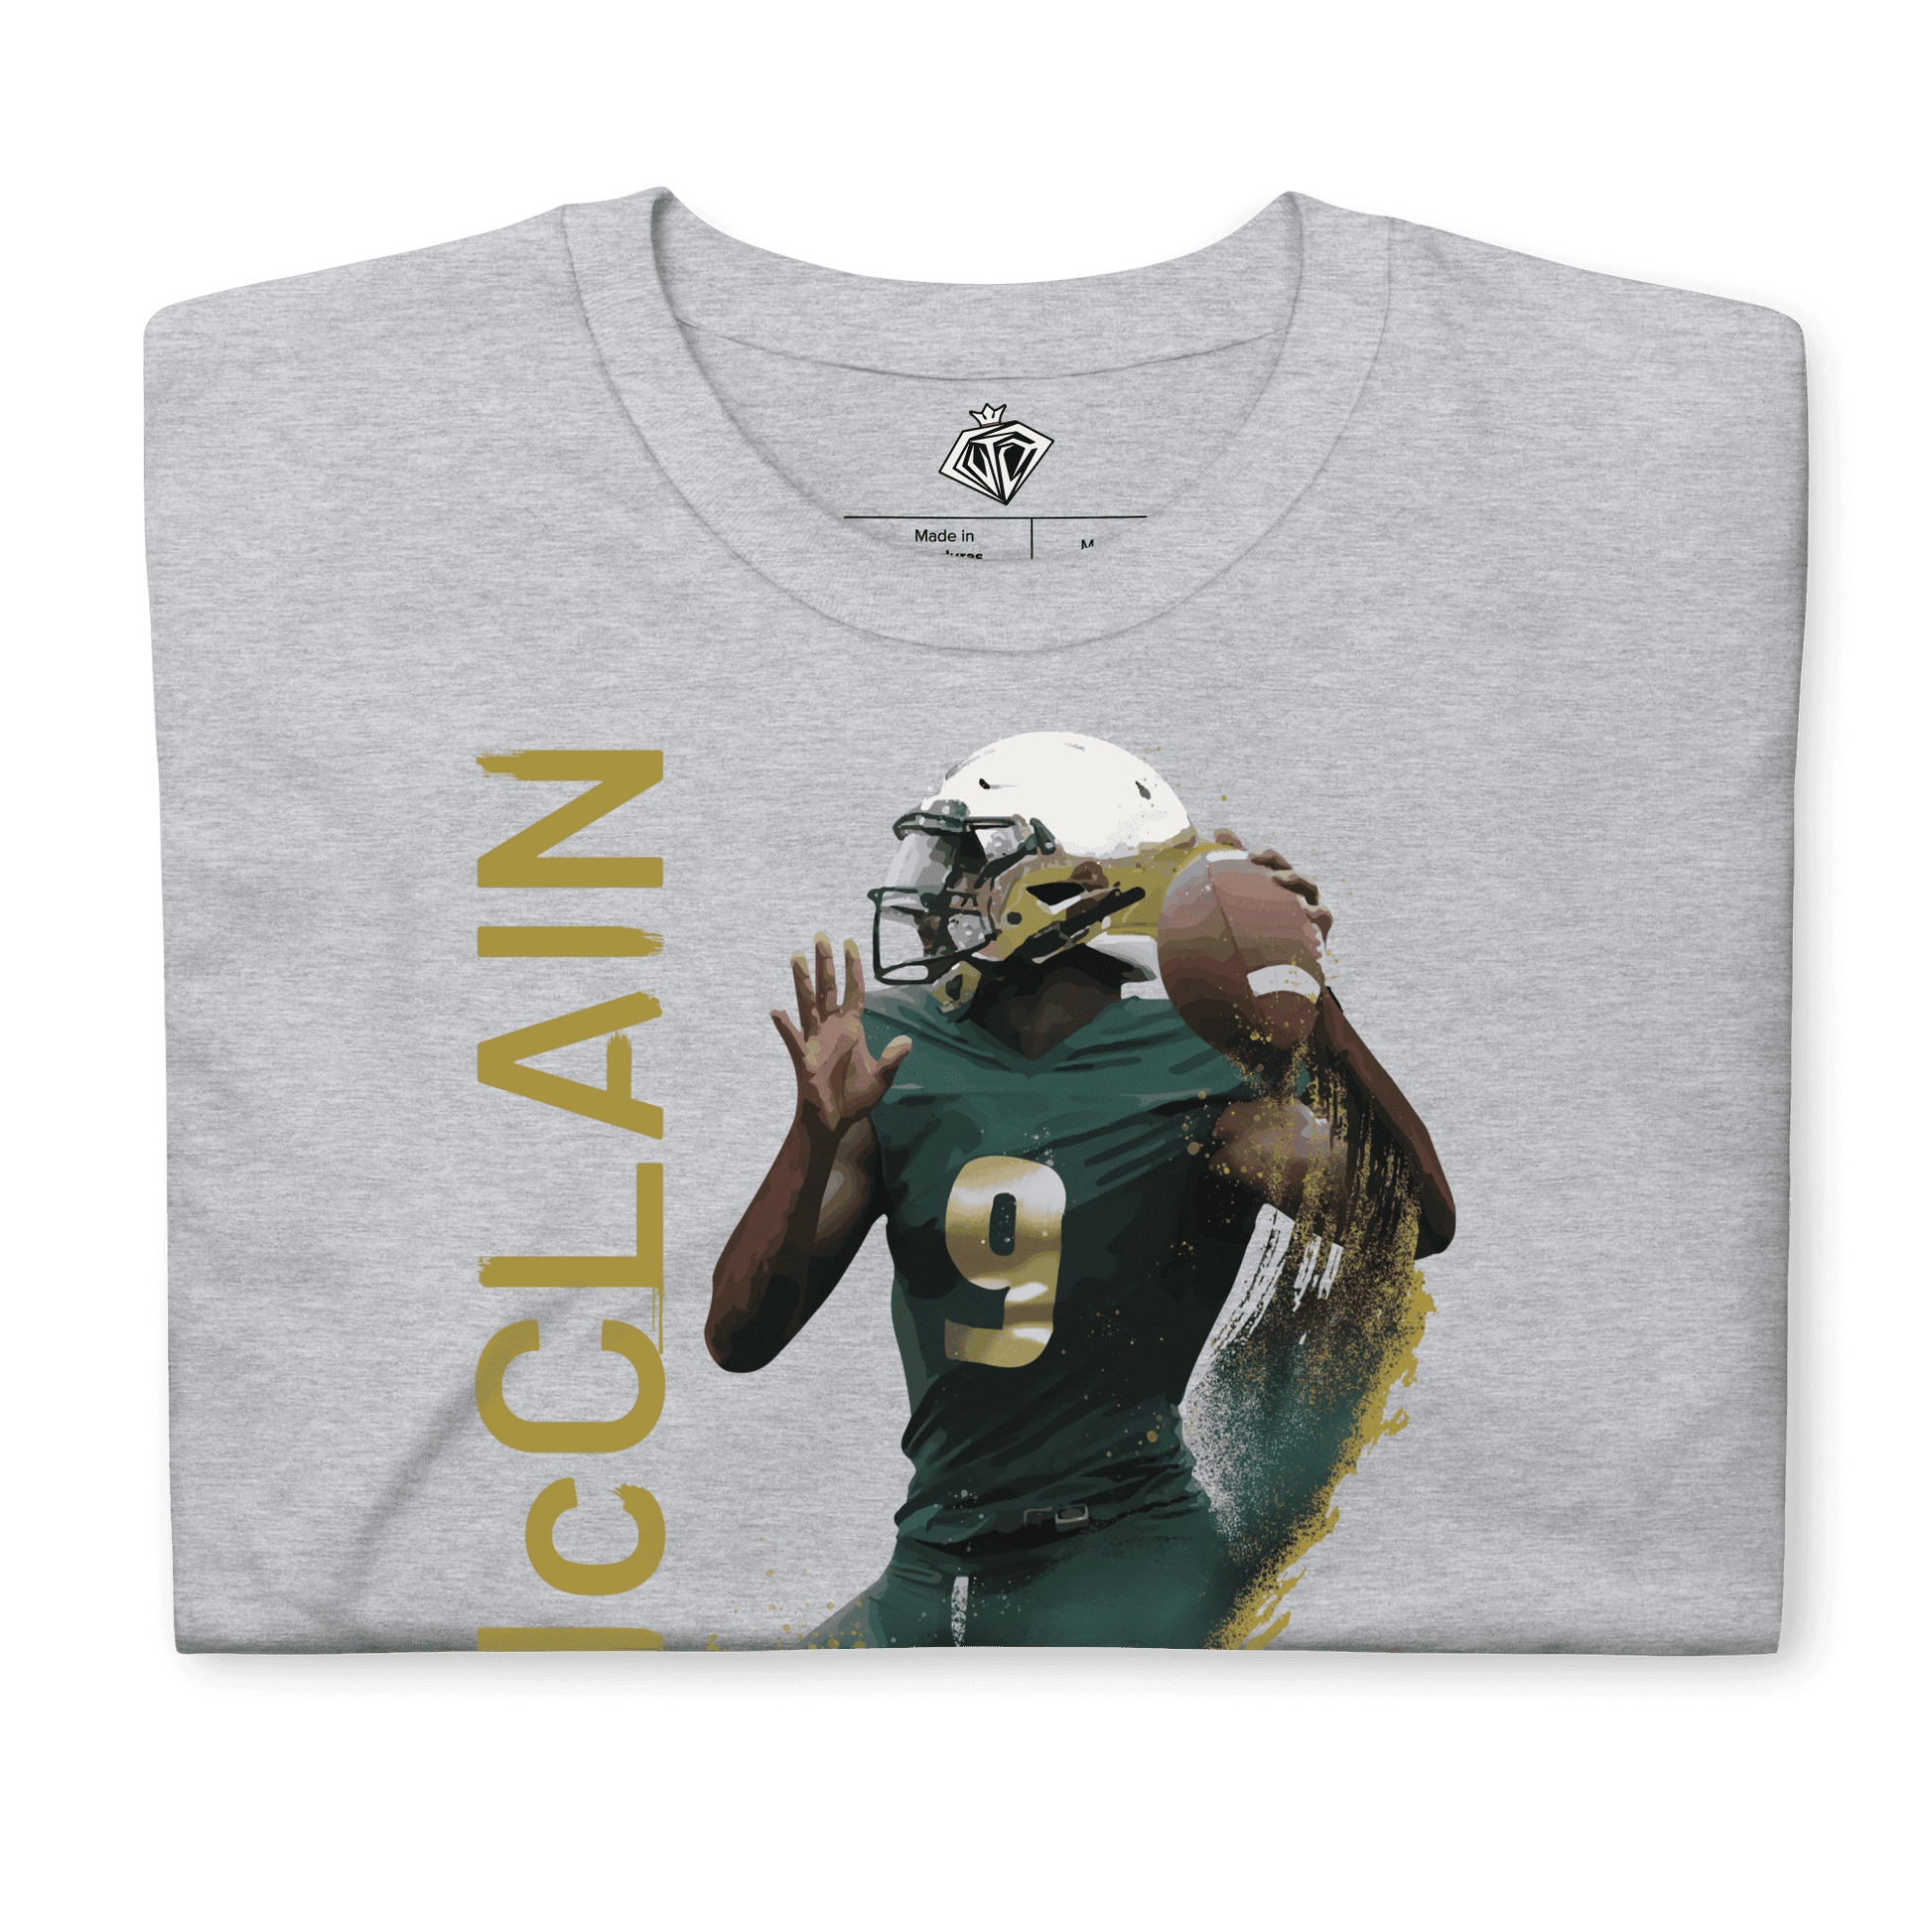 Timmy McClain | Mural Front Print T-shirt - Clutch - Clothing